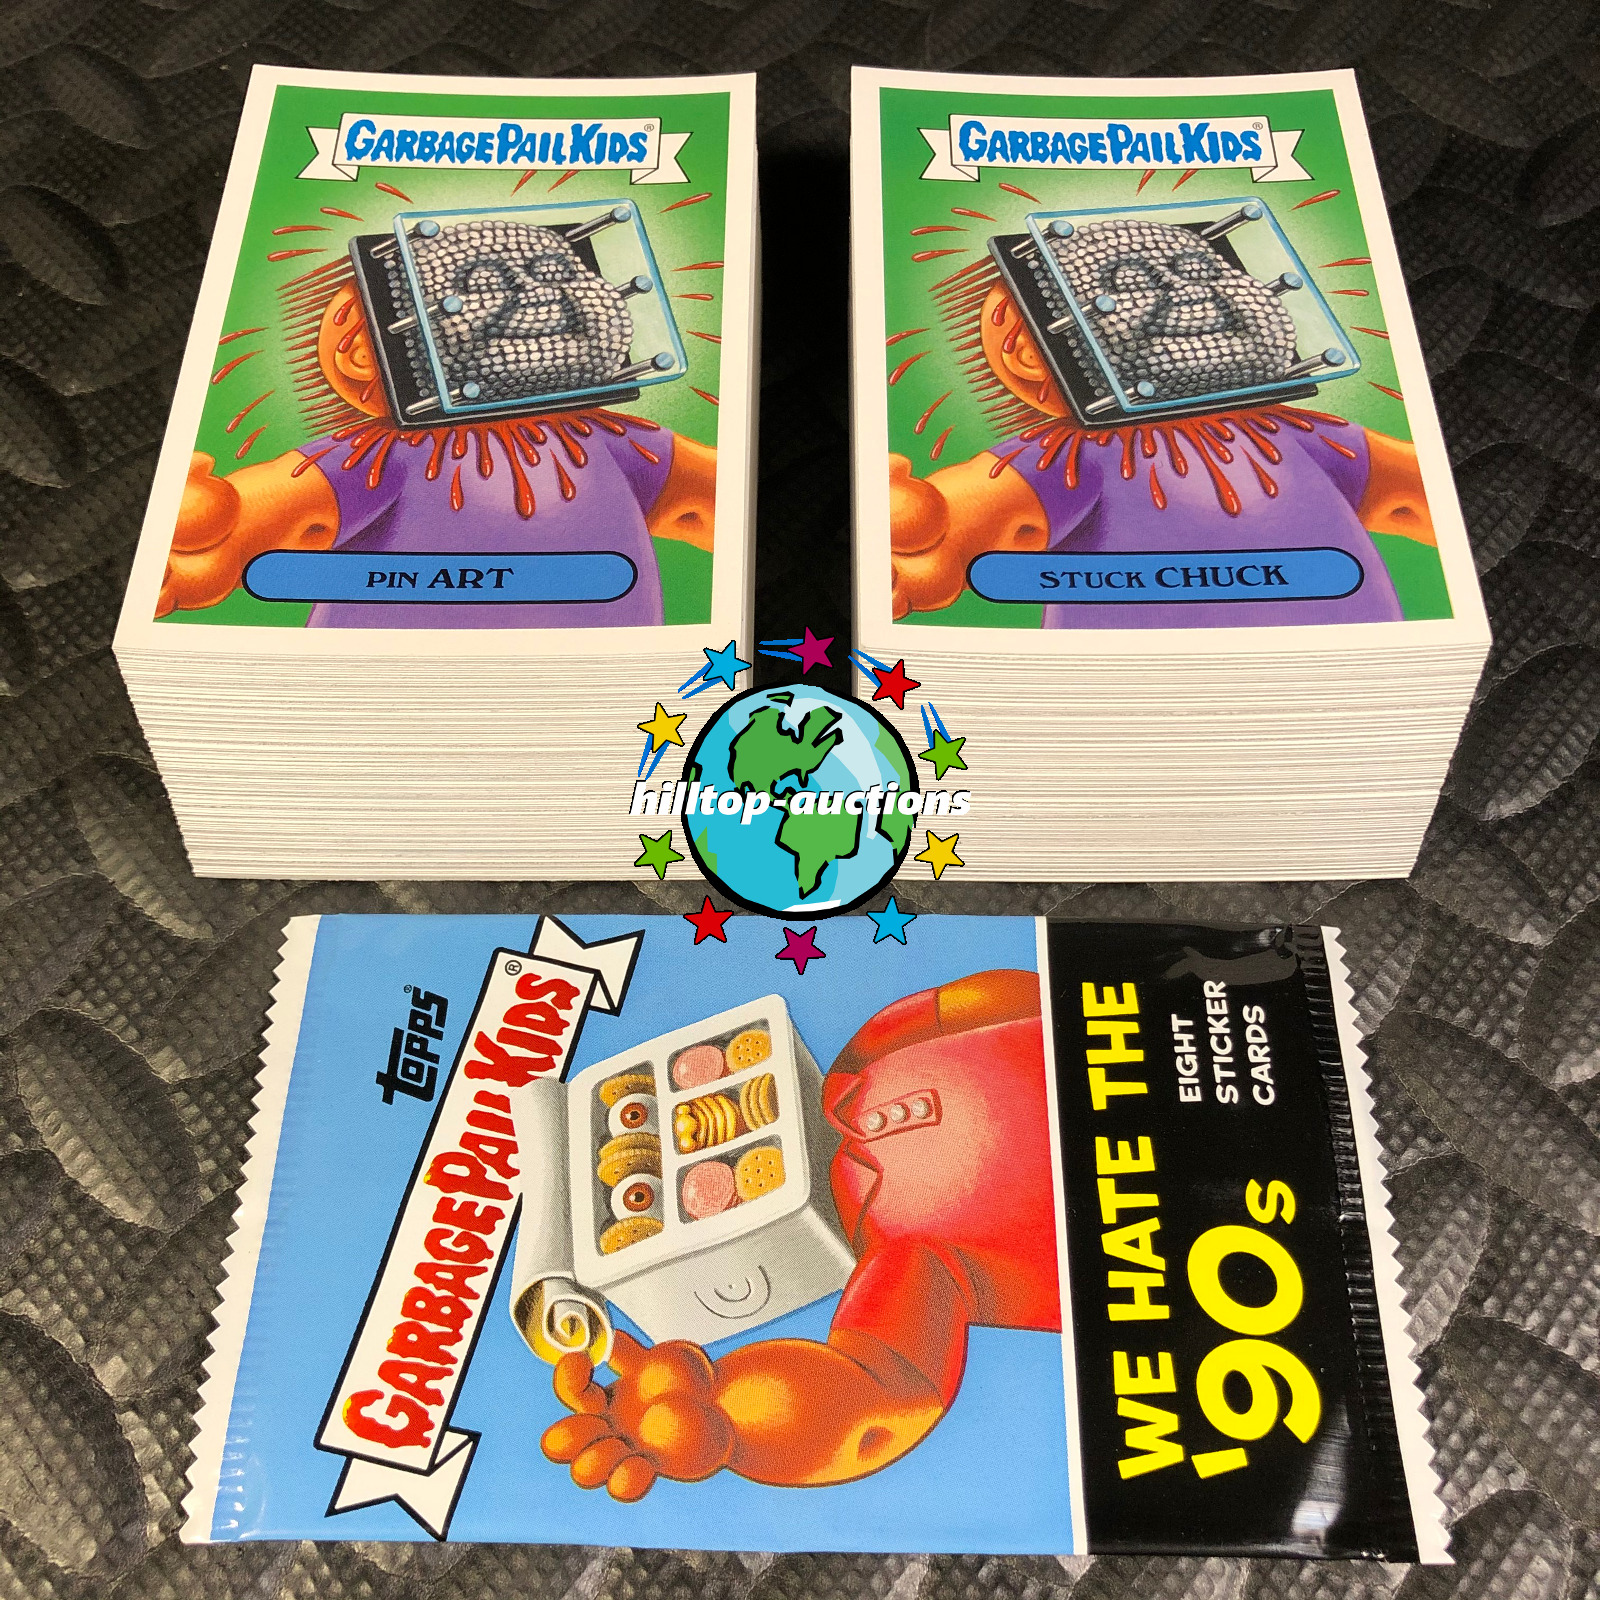 2019 GARBAGE PAIL KIDS WE HATE THE 90's COMPLETE 220-CARD SET +WRAPPER 1990's